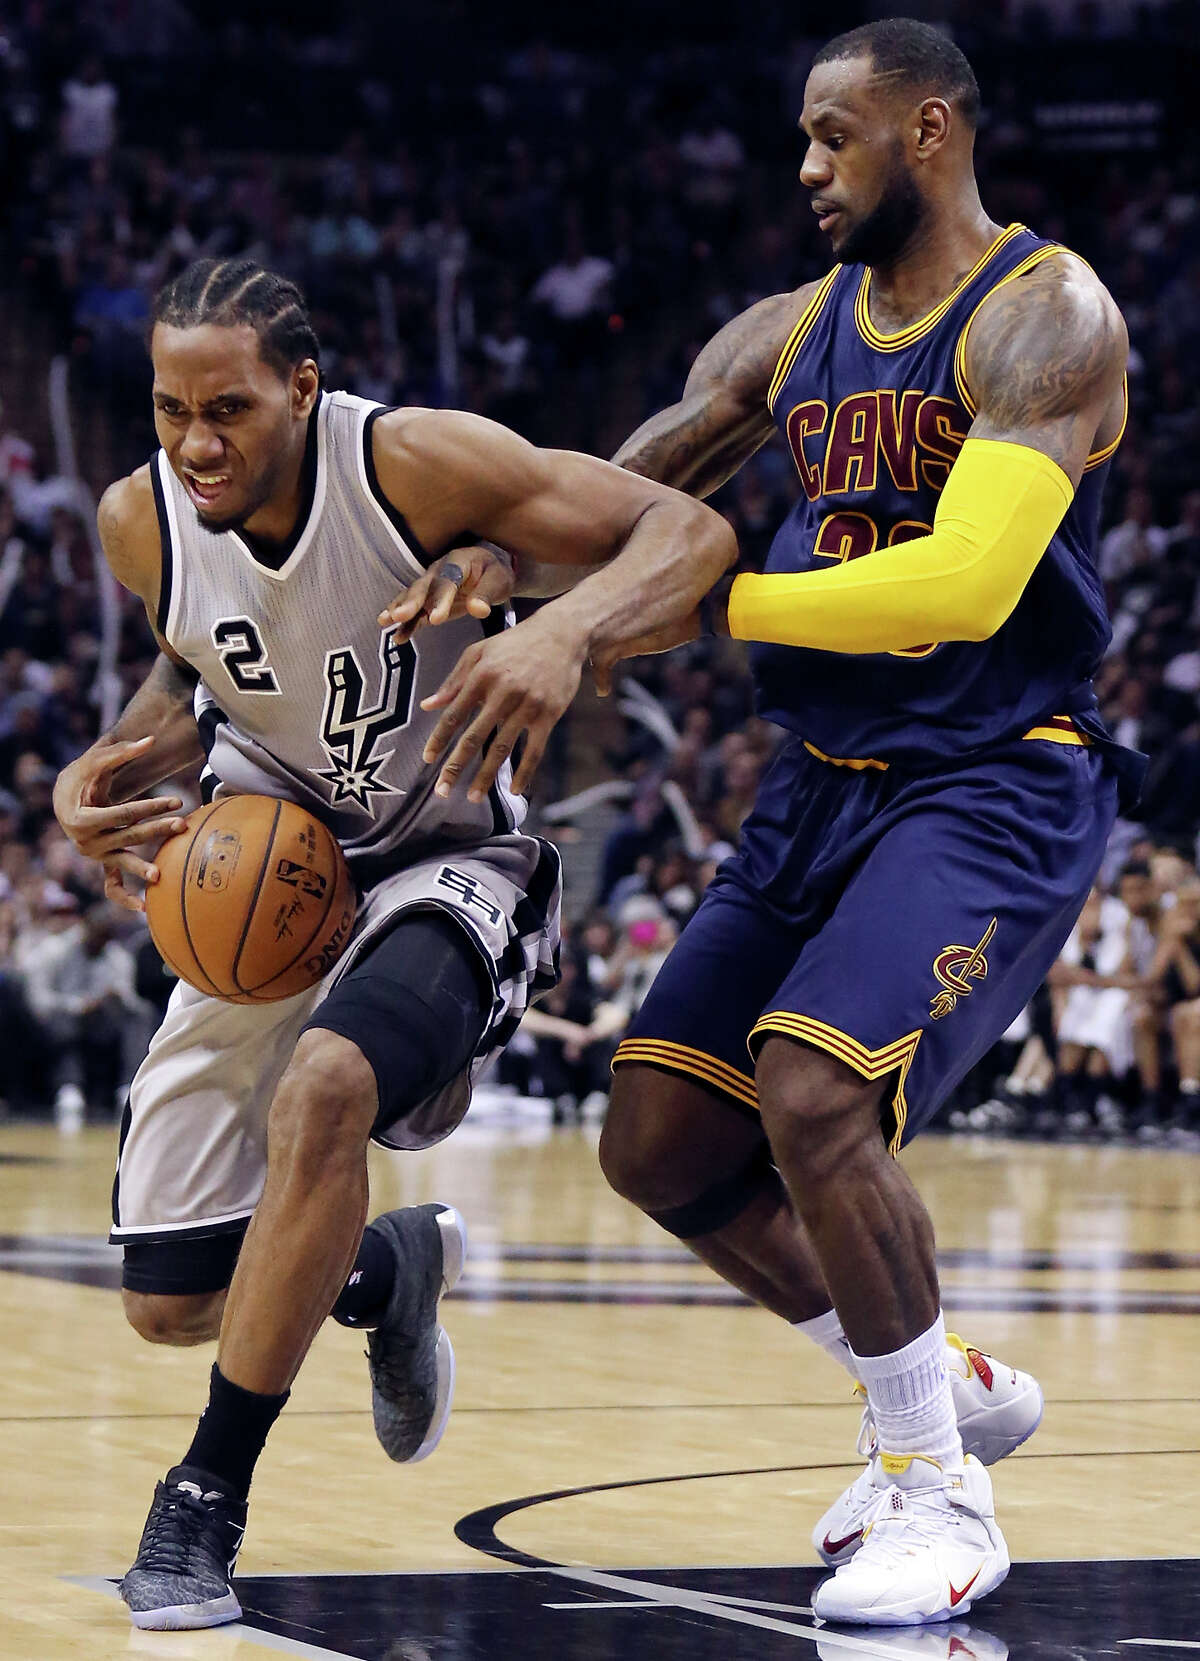 Spurs’ Kawhi Leonard looks for room around Cleveland Cavaliers’ LeBron James during their game March 12, 2015 at the AT&T Center.